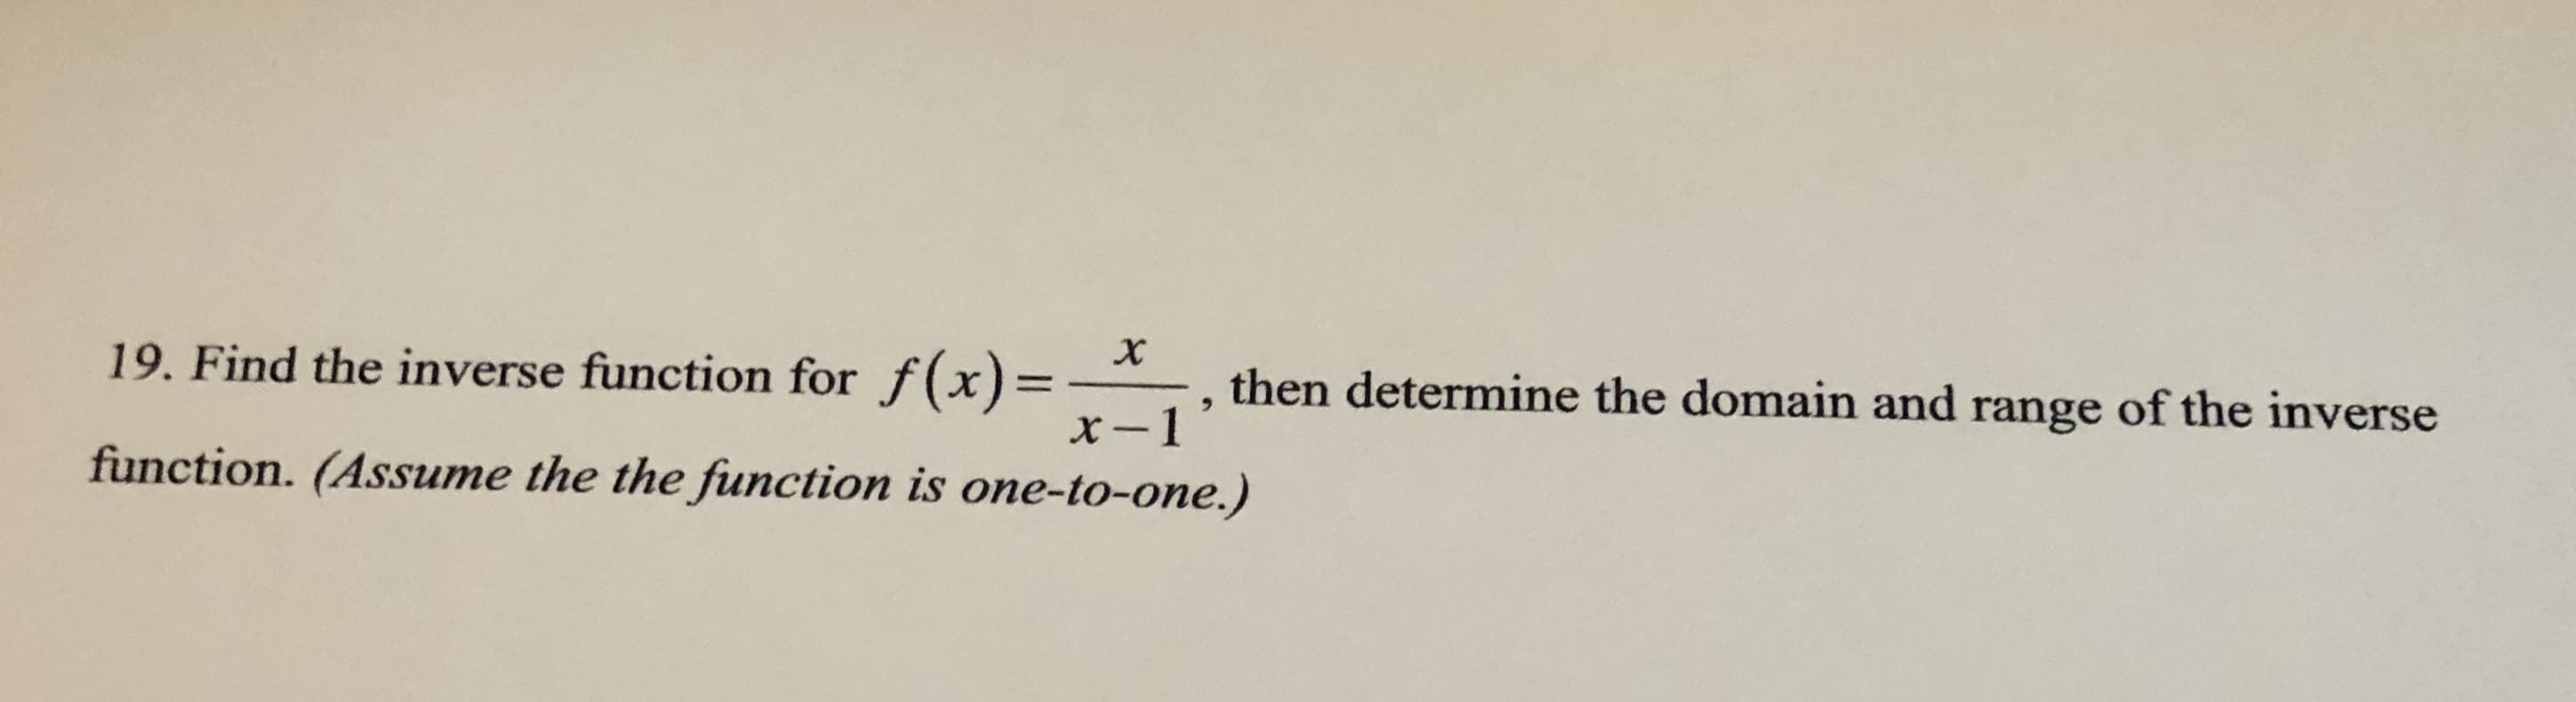 19. Find the inverse function for f(x)=
then determine the domain and range of the inverse
%3D
function. (Assume the the function is one-to-one.)
